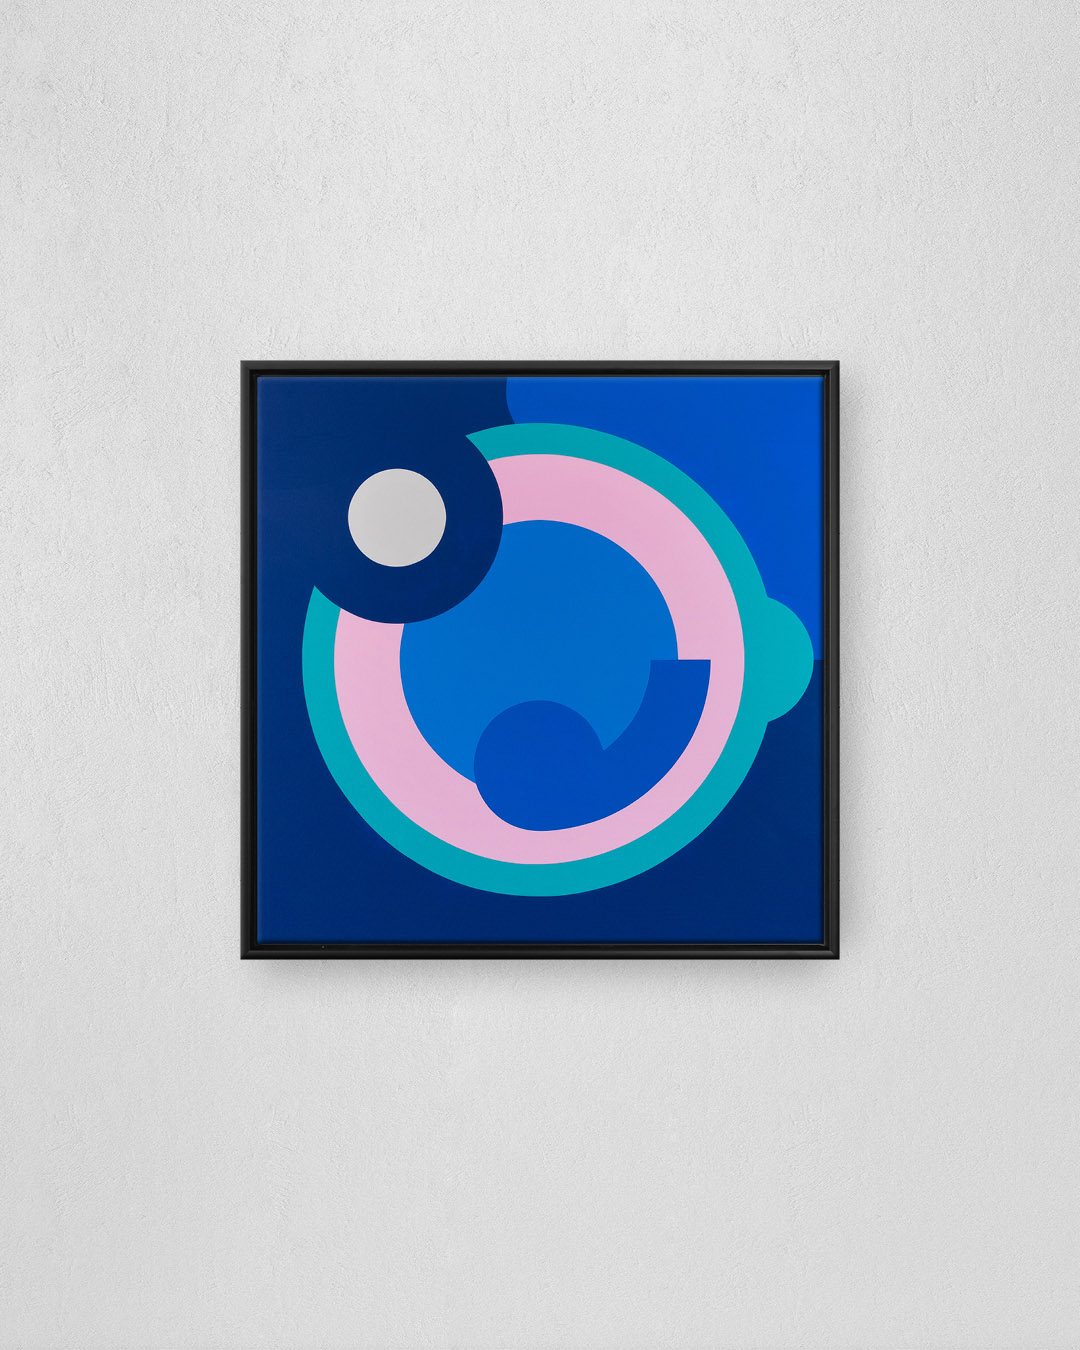 Divided circles, completed in 2019 with acrylic paints on a 70 x 70 cm canvas.